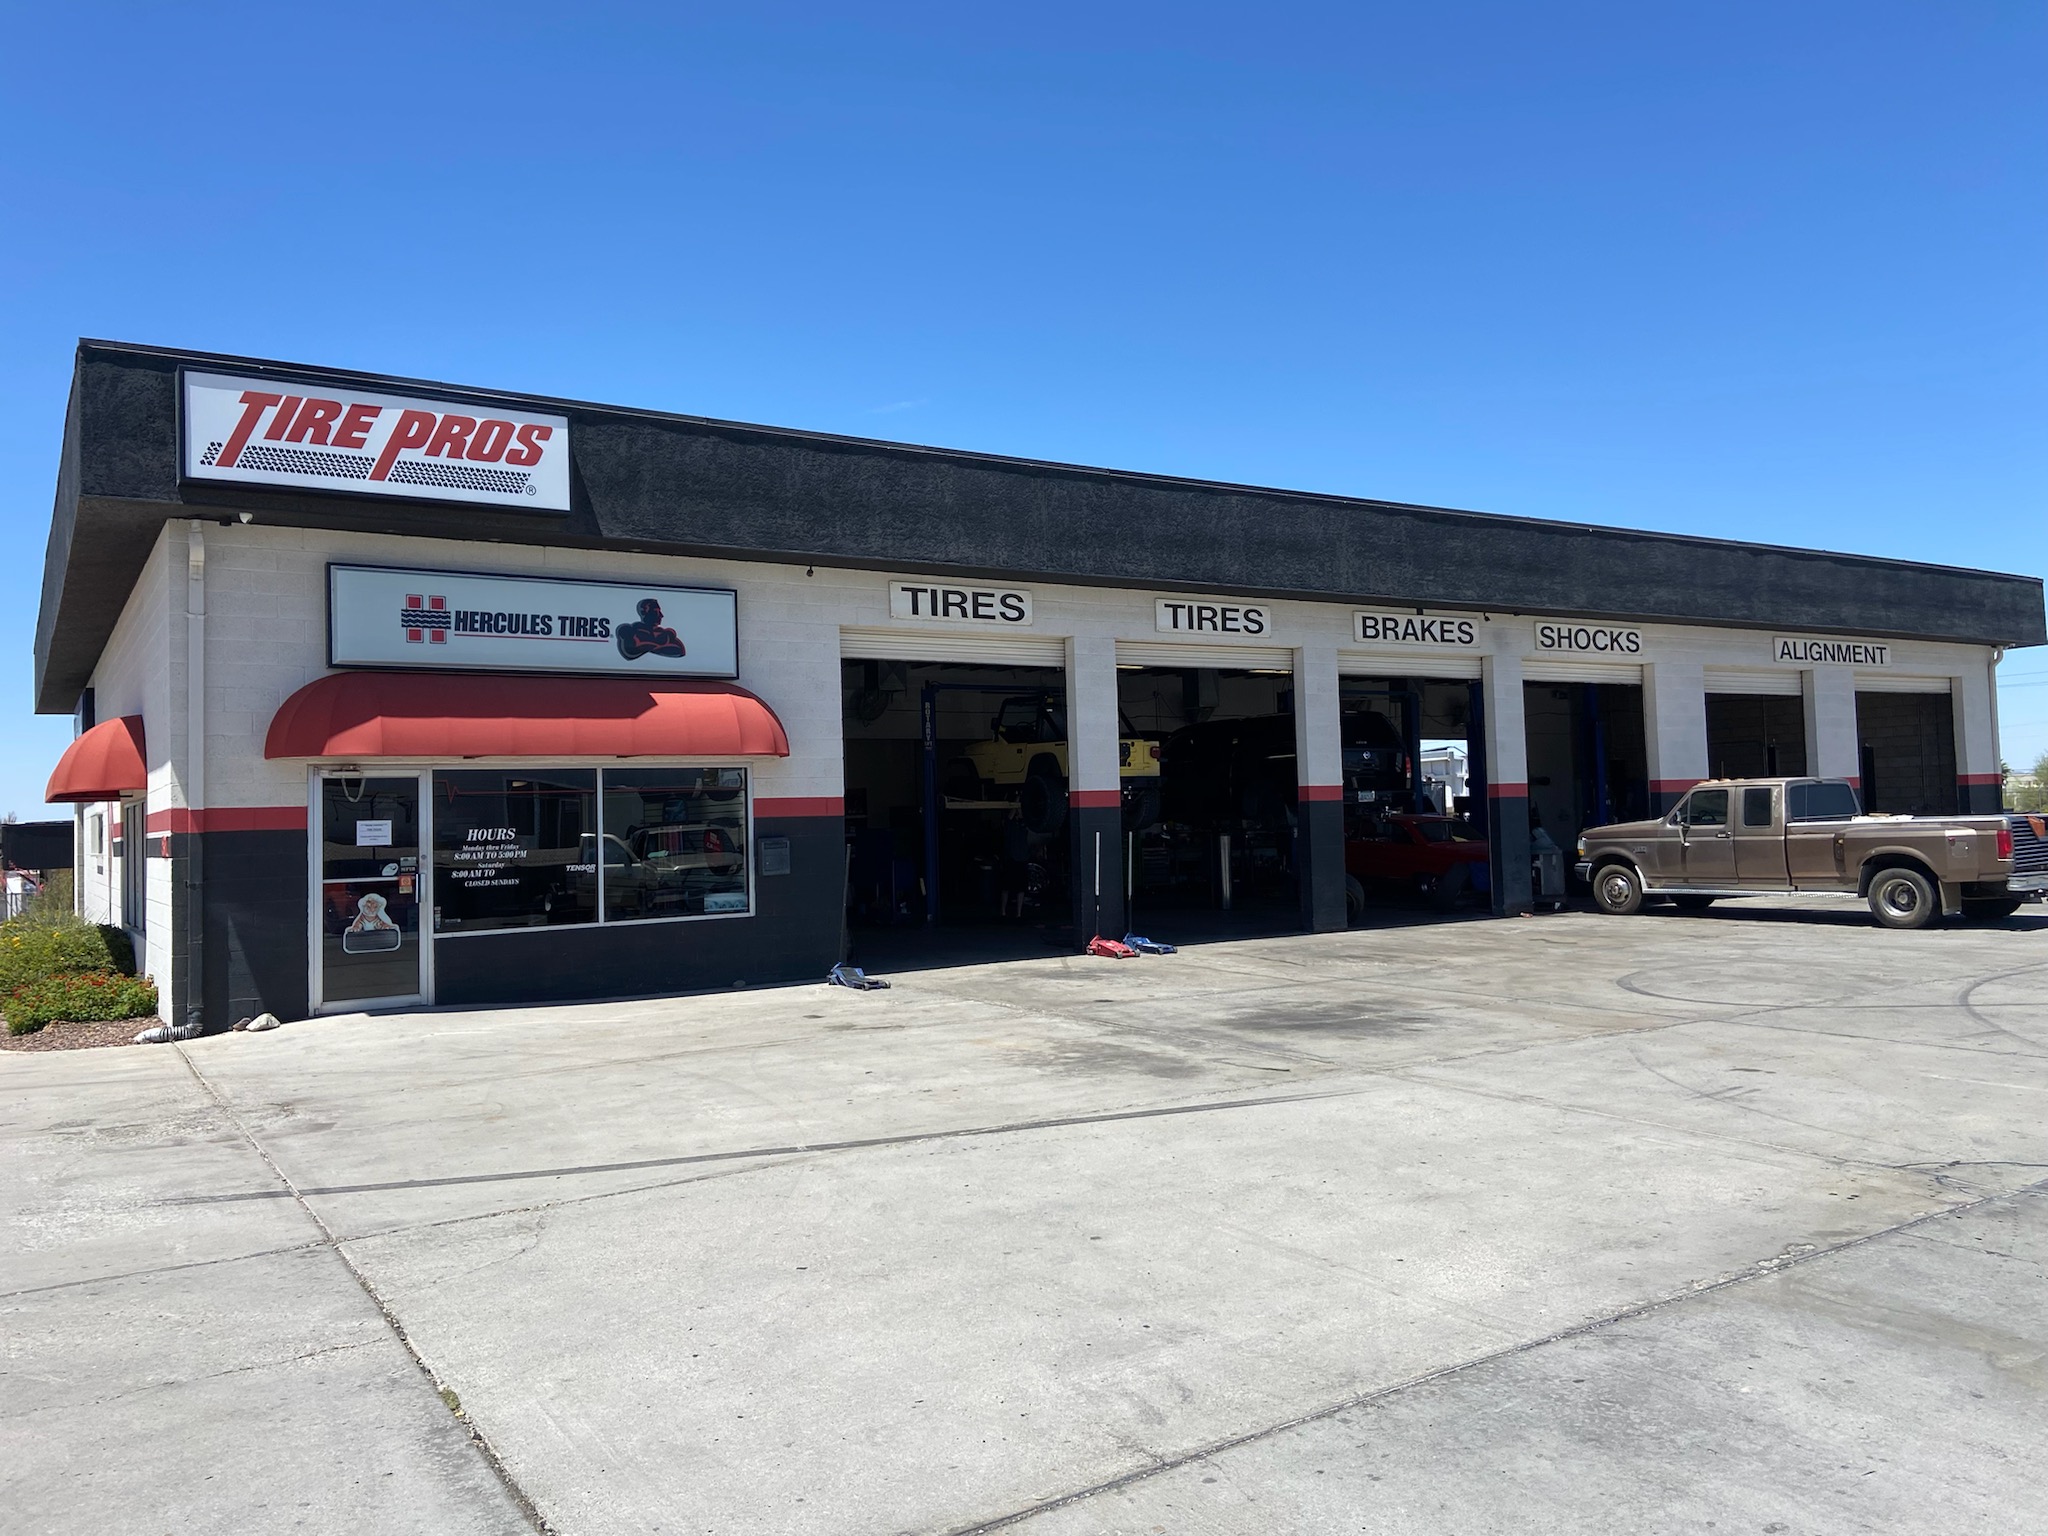 Haralson Tire Pros & Auto Service   StoreFront